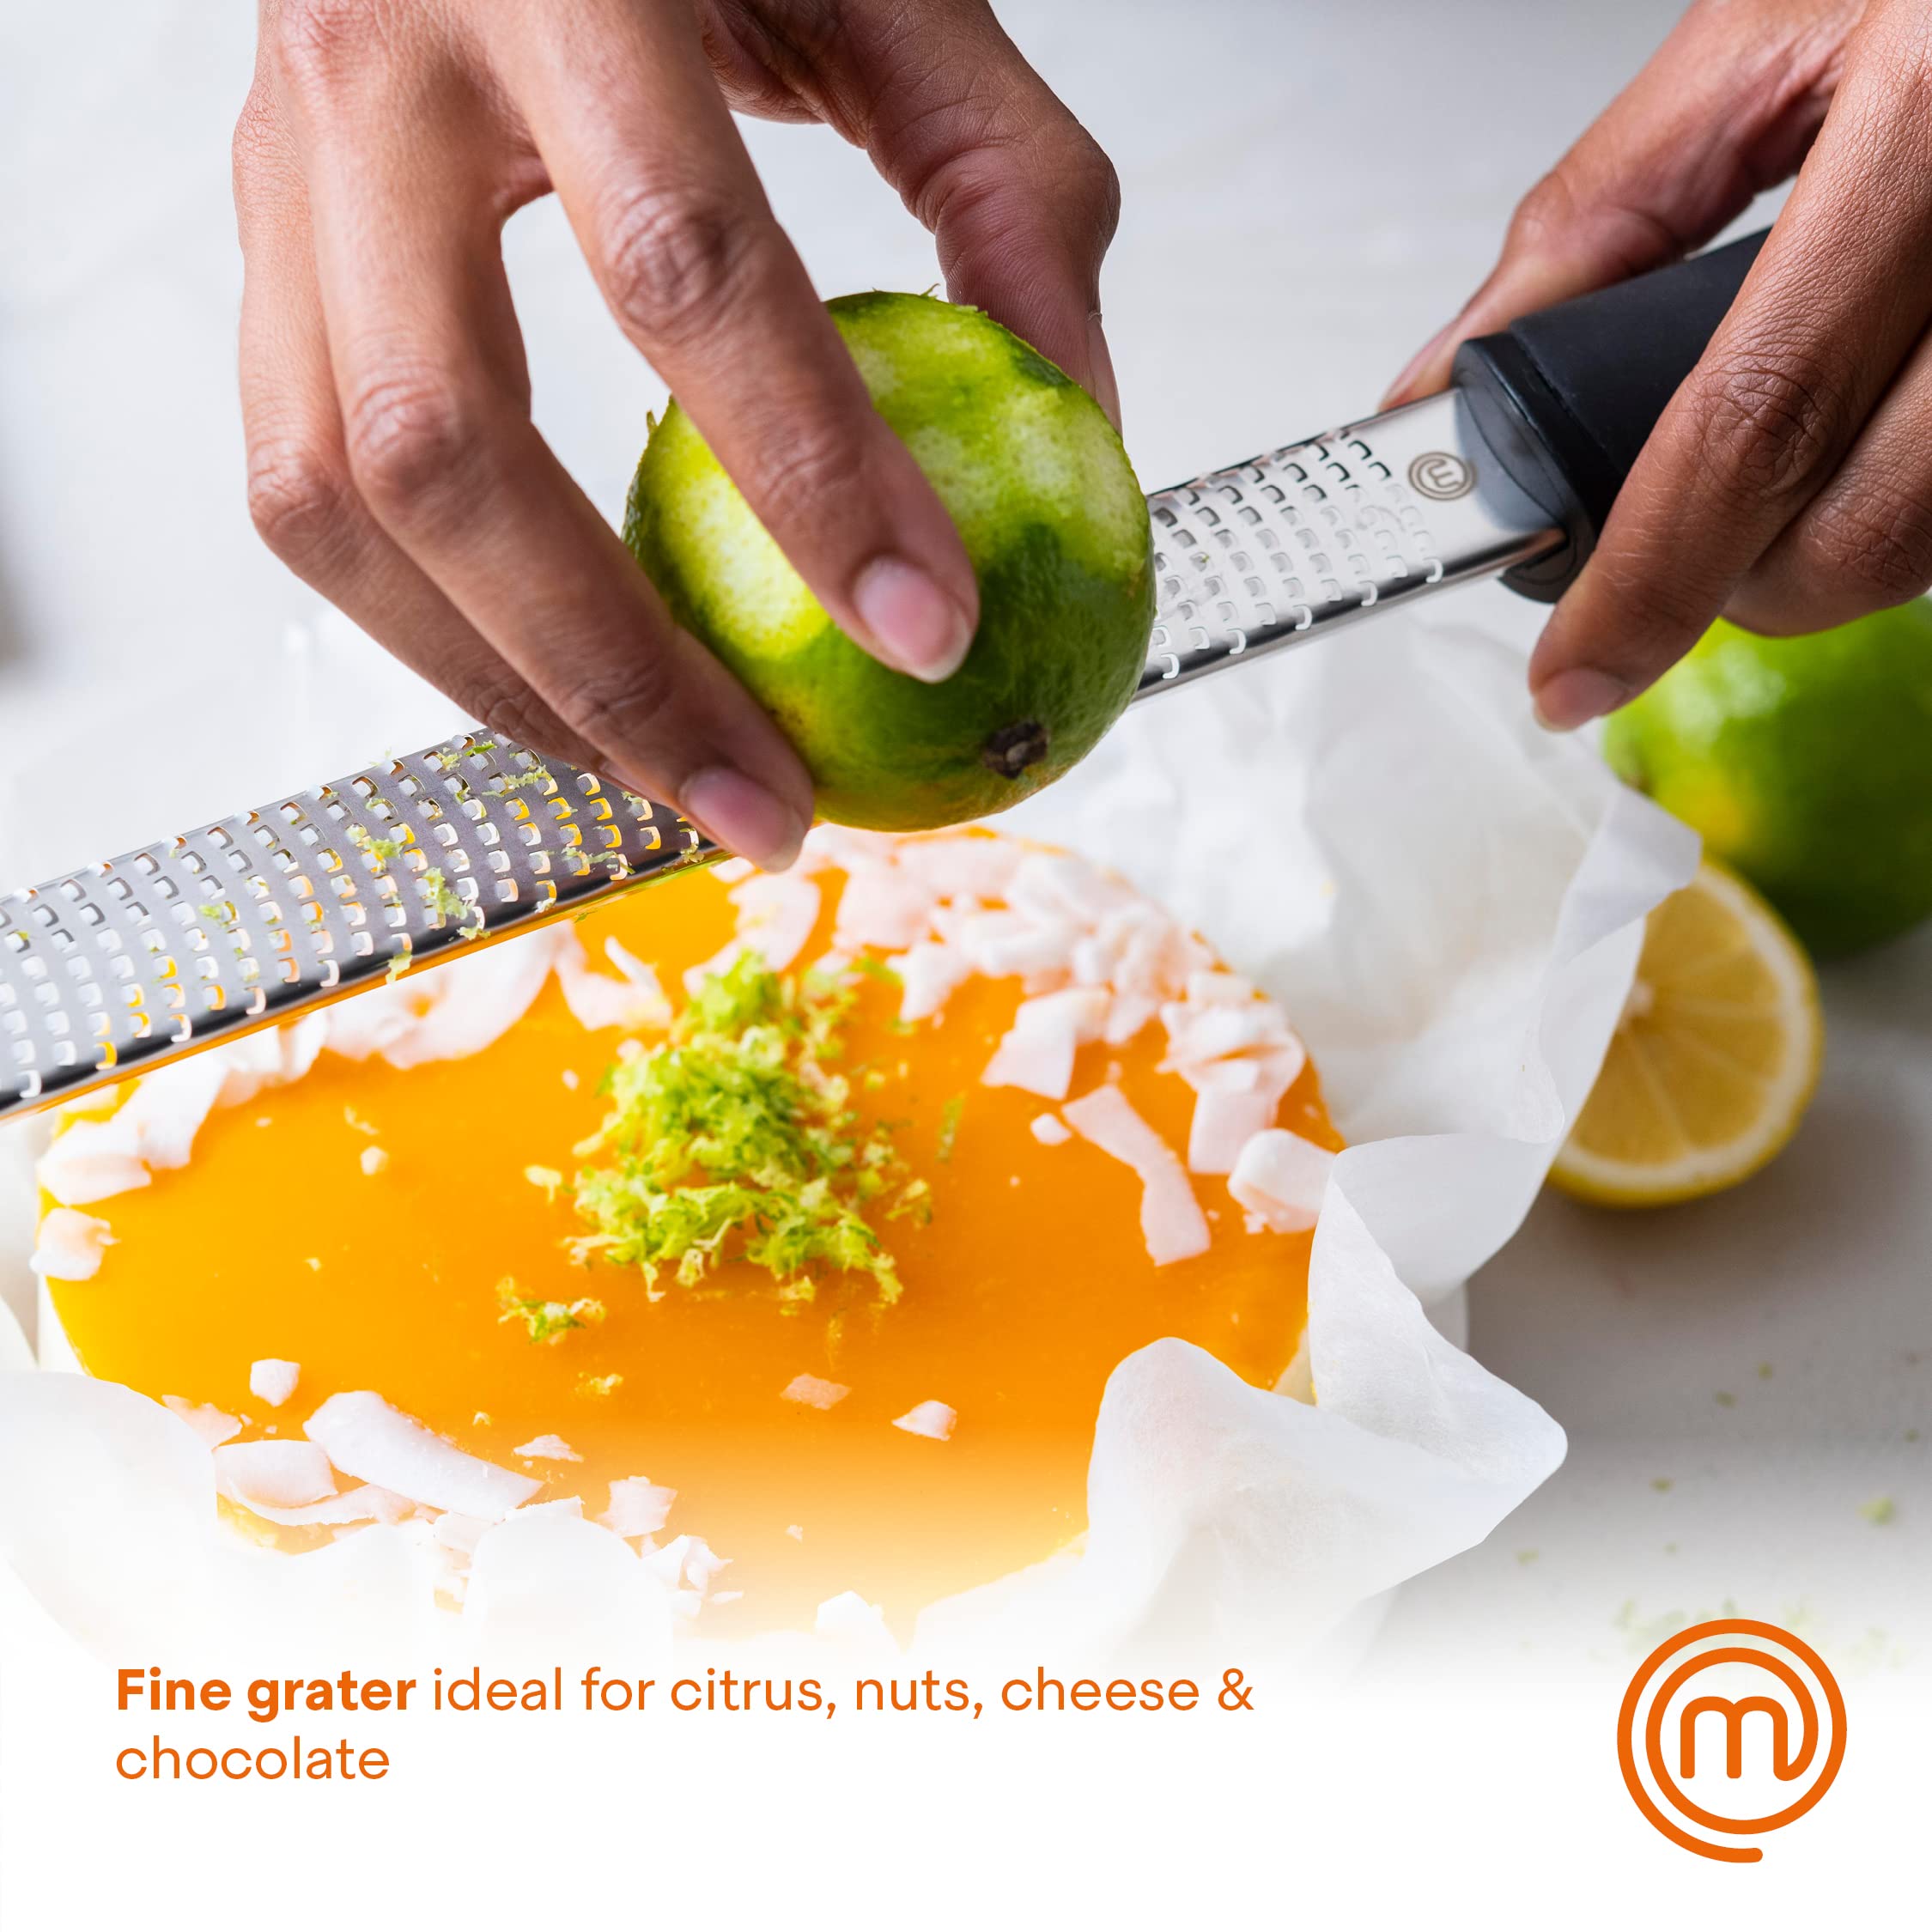 MasterChef Lemon Zester Grater with Handle, Kitchen Tool for Zesting Citrus Fruits & Finely Grating Parmesan Cheese, Garlic, Ginger, Coconut, Nutmeg, Wasabi, Chocolate etc, Stainless Steel, 12 inches